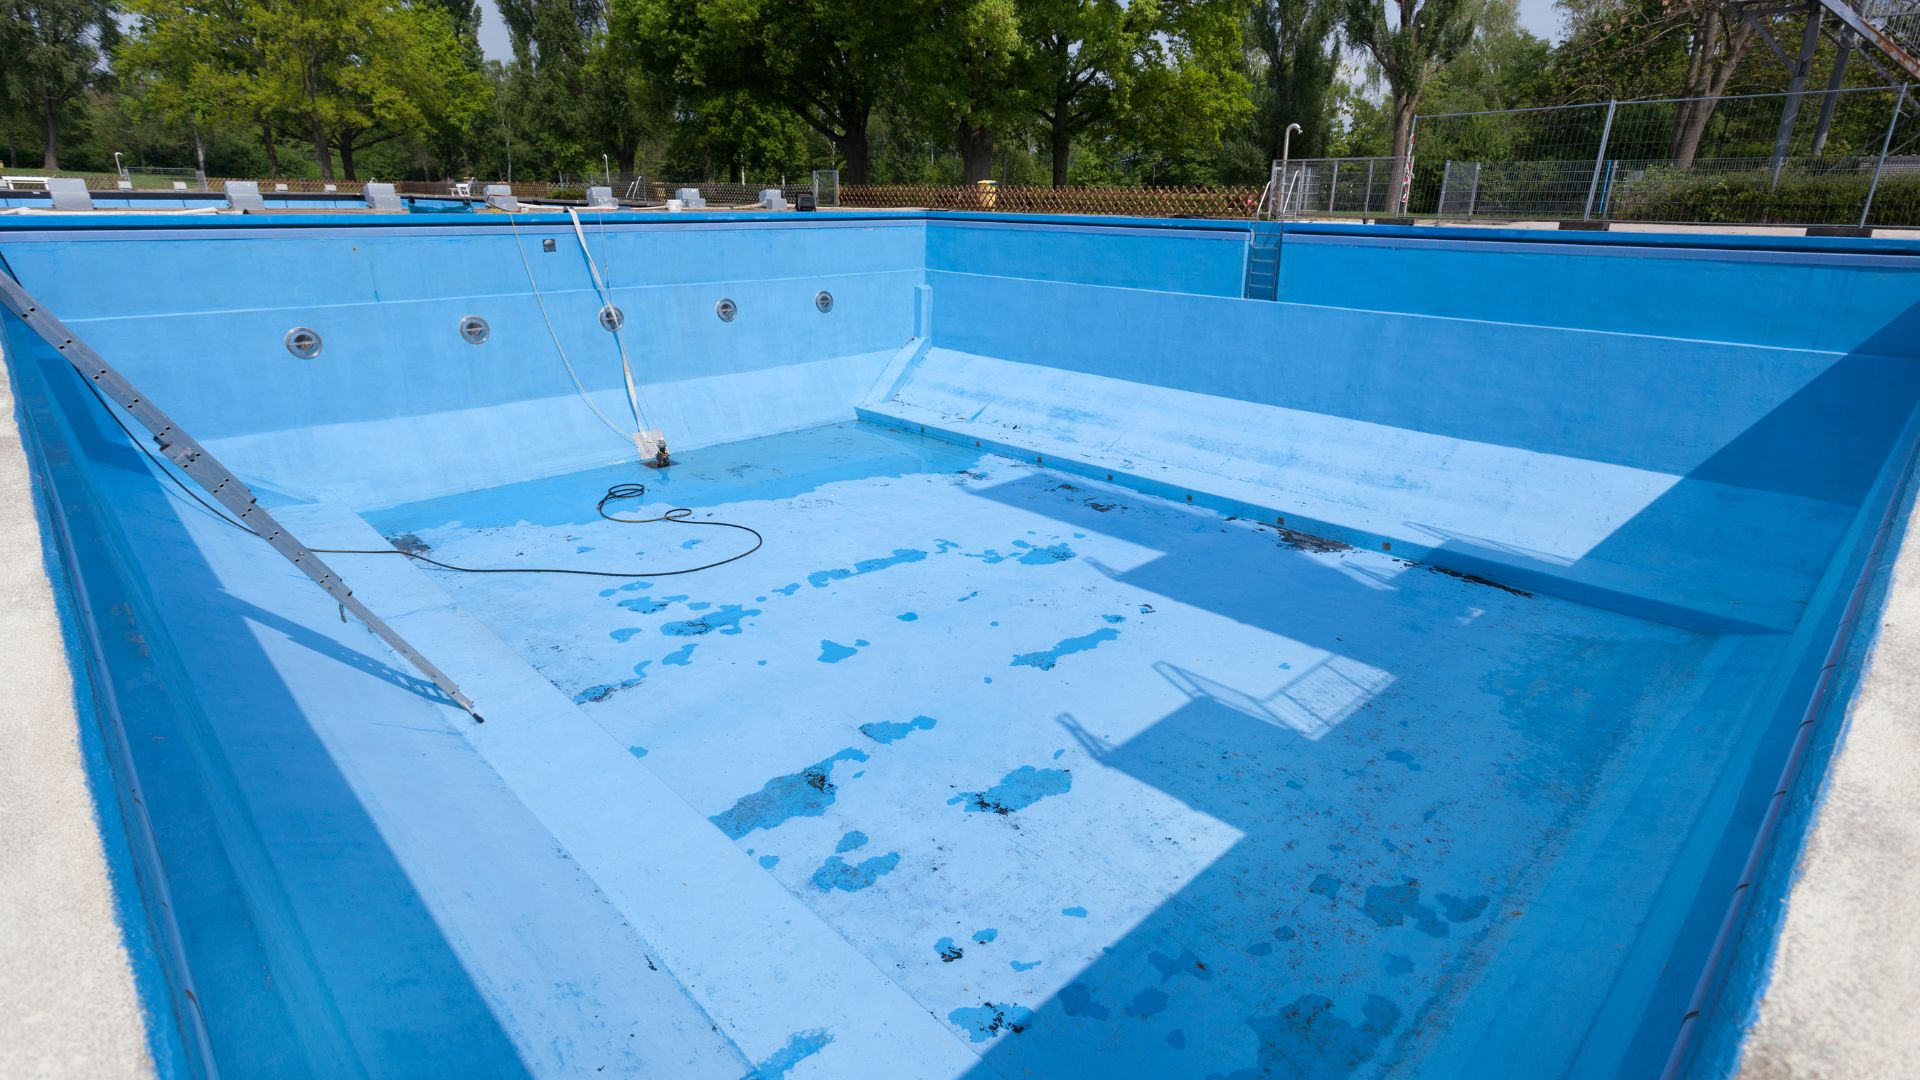 Is Your Houston Pool Due for Renovation? Find Out!